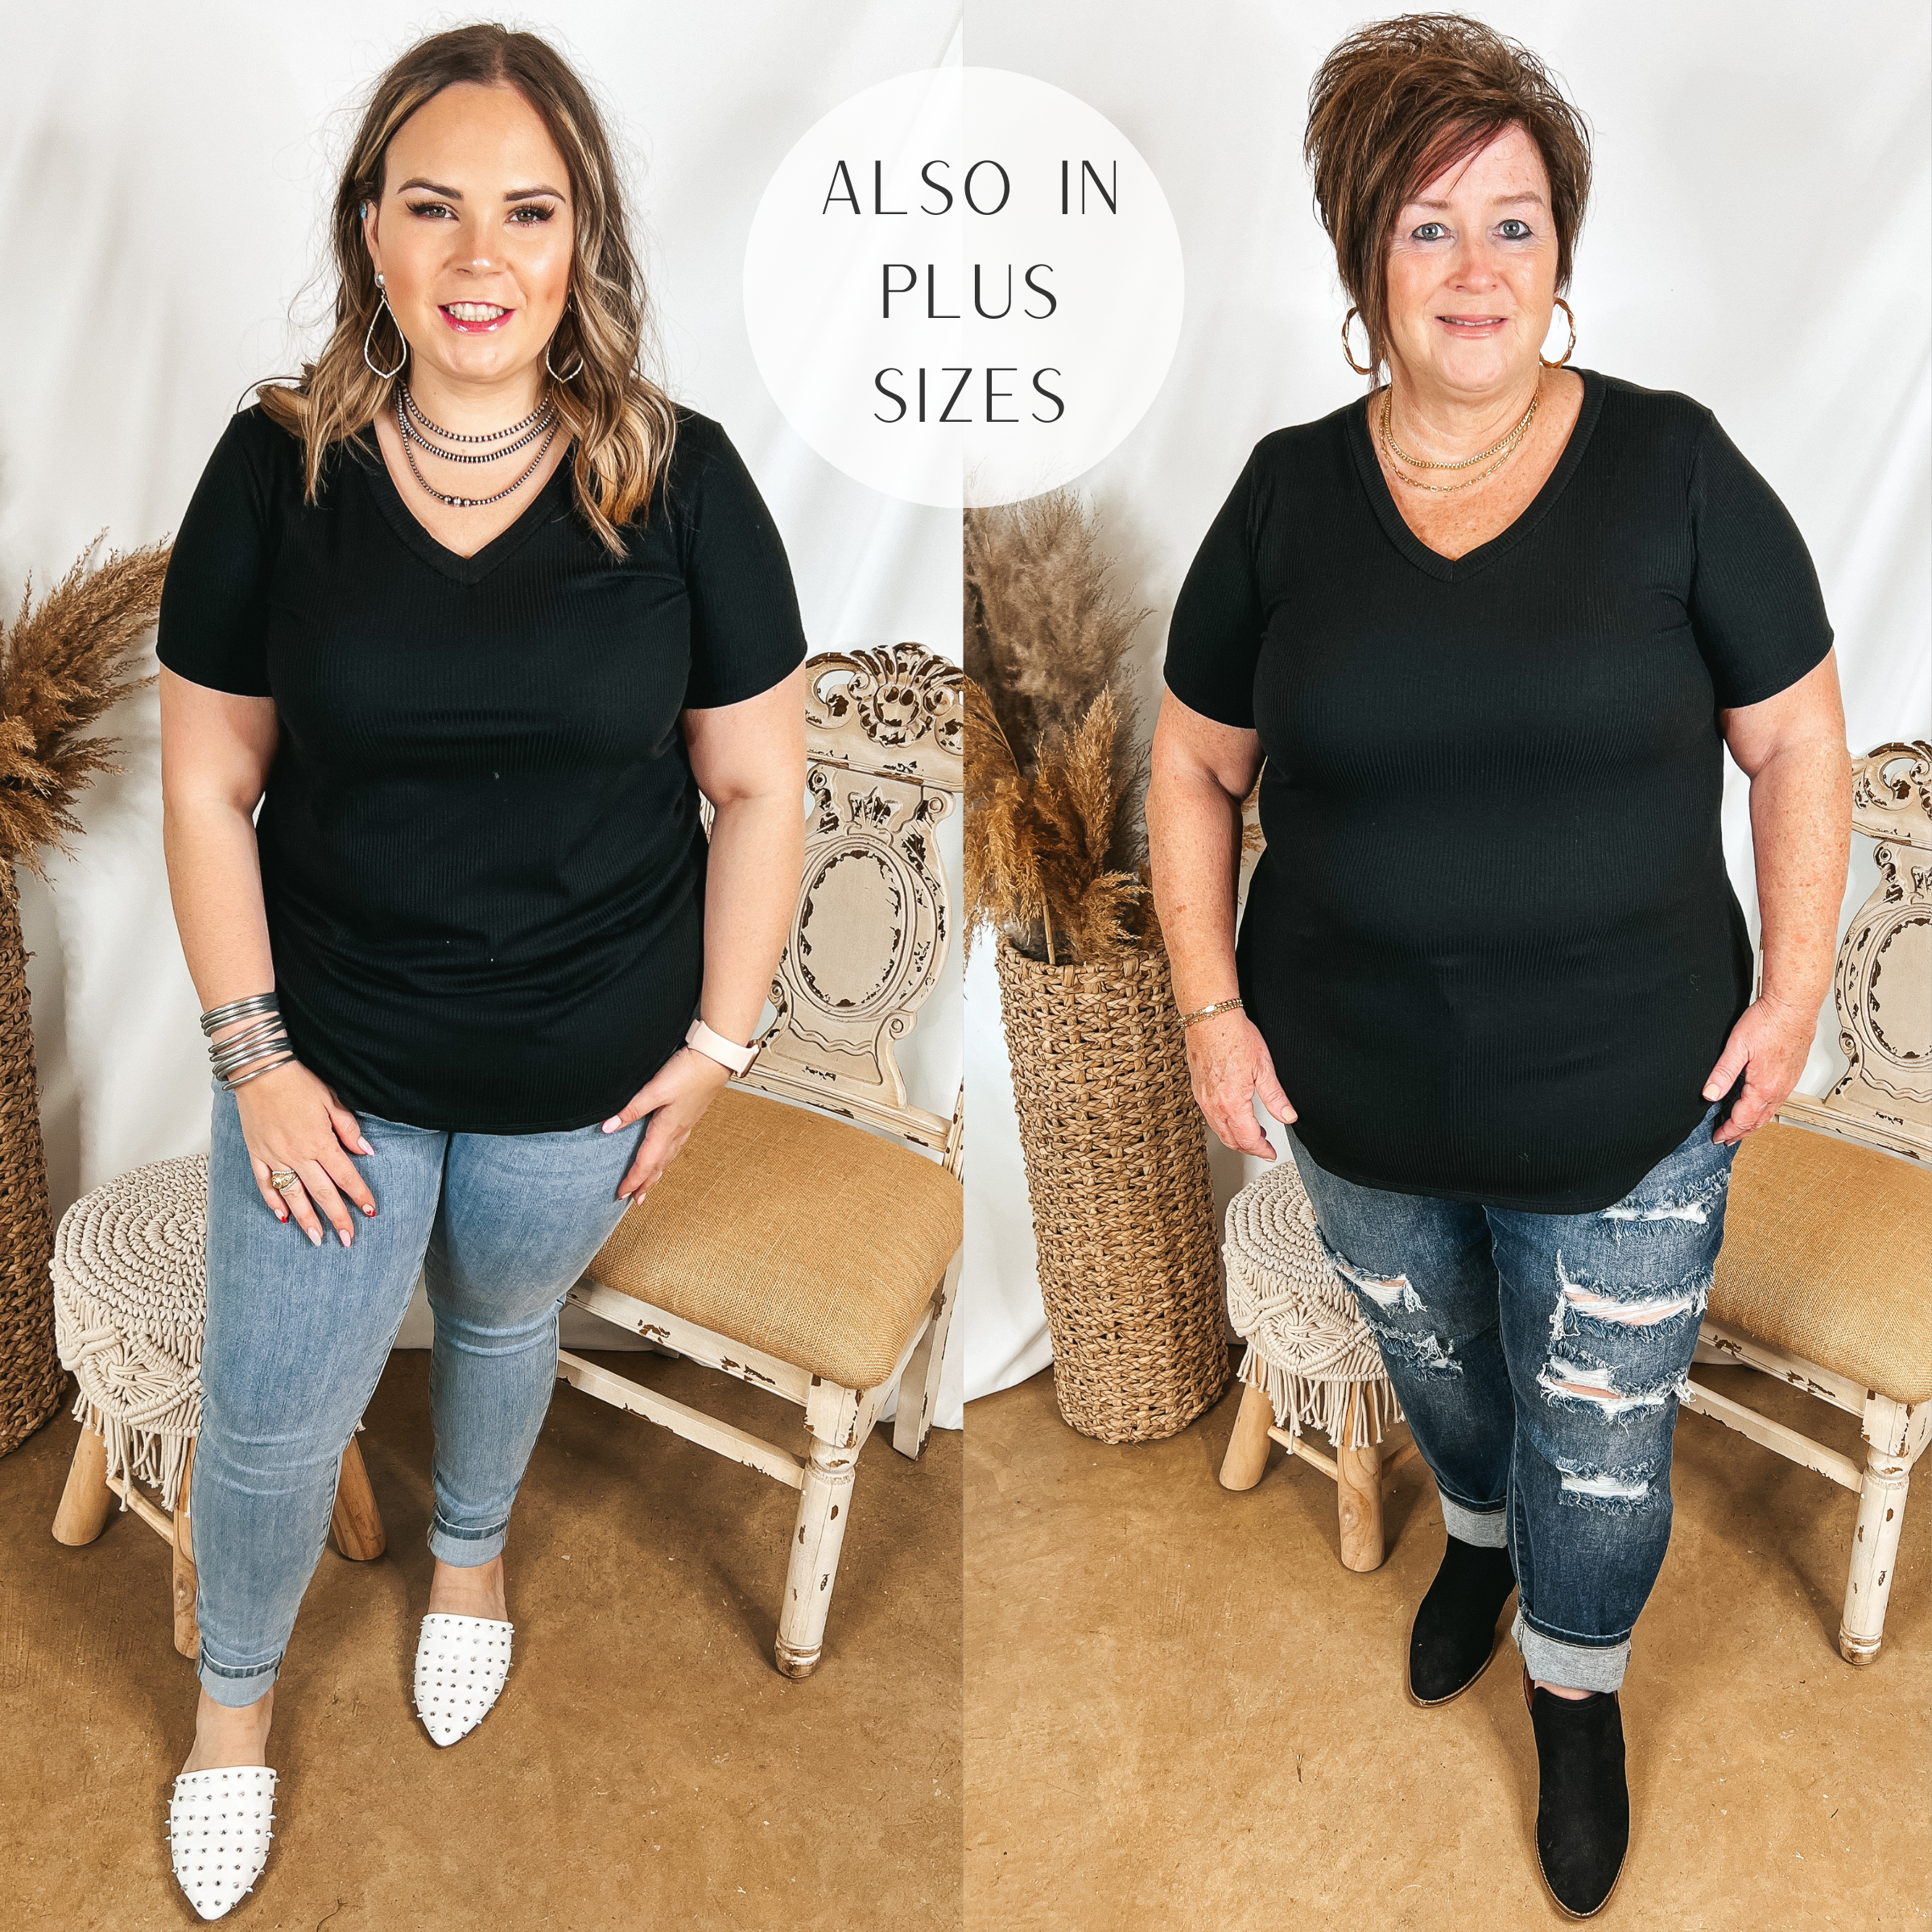 Models are wearing a black ribbed top. Size large model has it paired with light wash skinny jeans, white mules, and silver jewelry. Plus size model has it paired with distressed jeans, black booties, and gold jewelry.